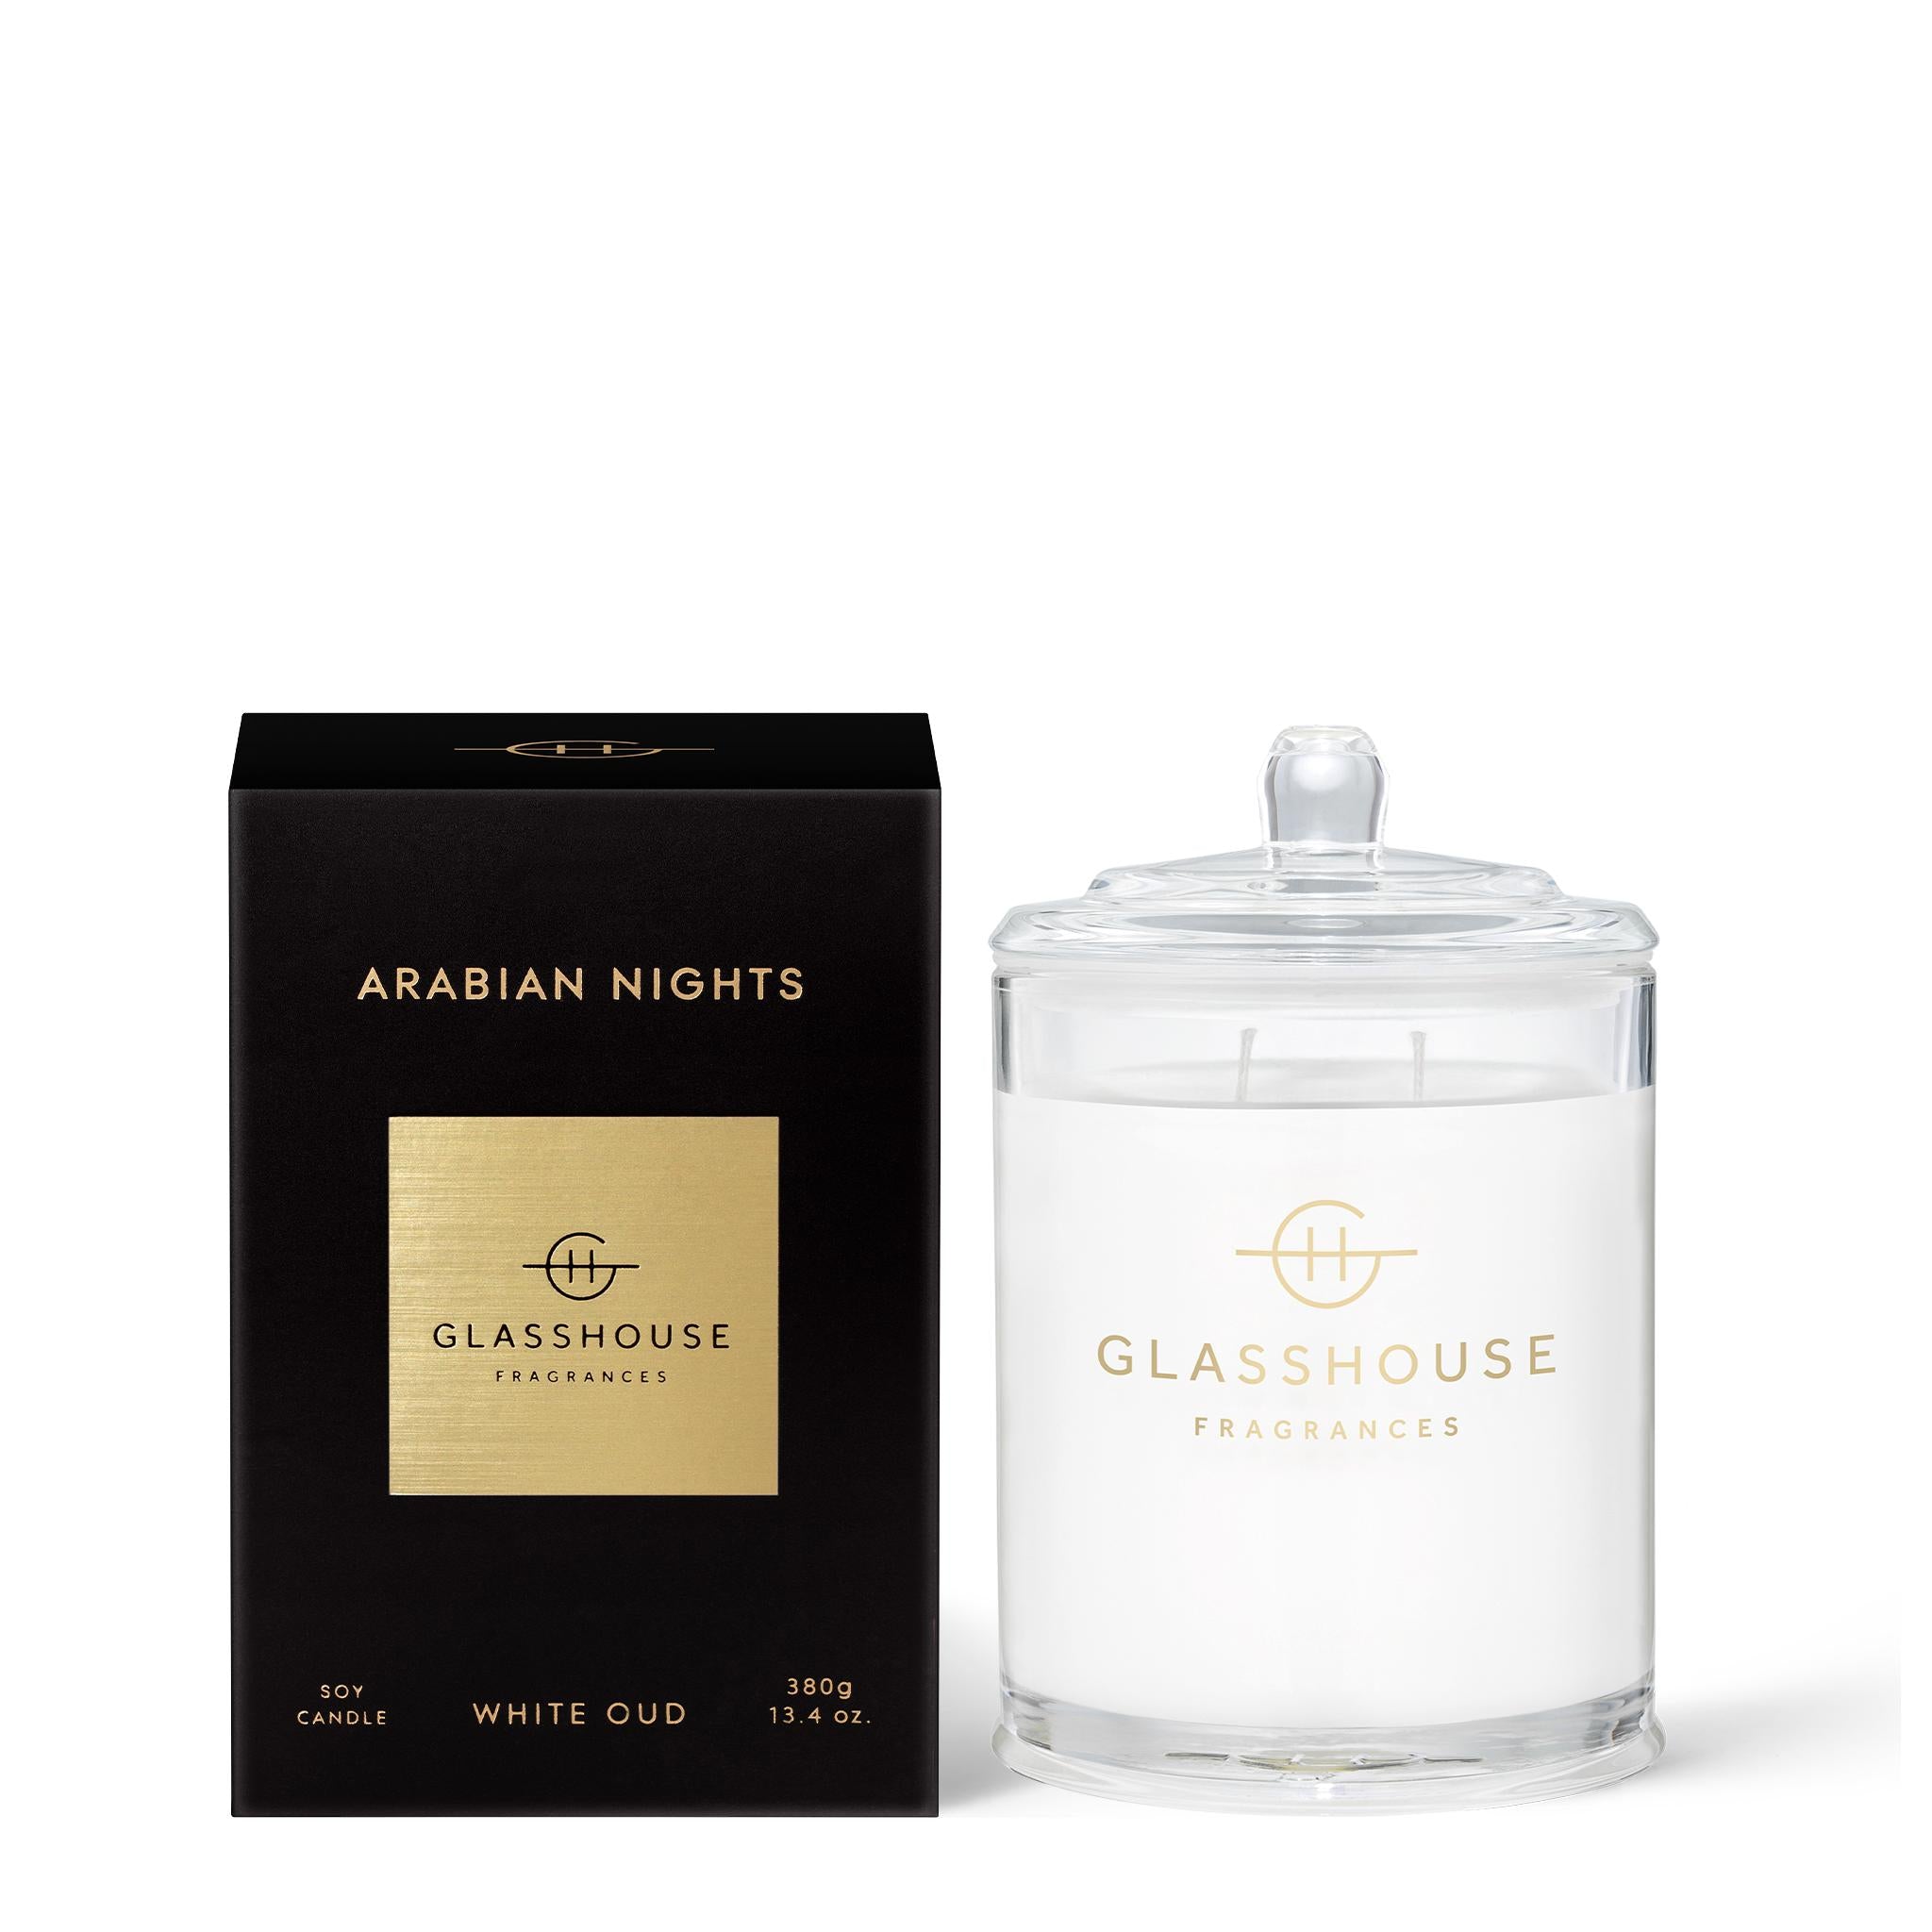 380g Soy Candle - Asst Fragrances-Candles & Fragrance-Glasshouse-Arabian Nights-The Bay Room